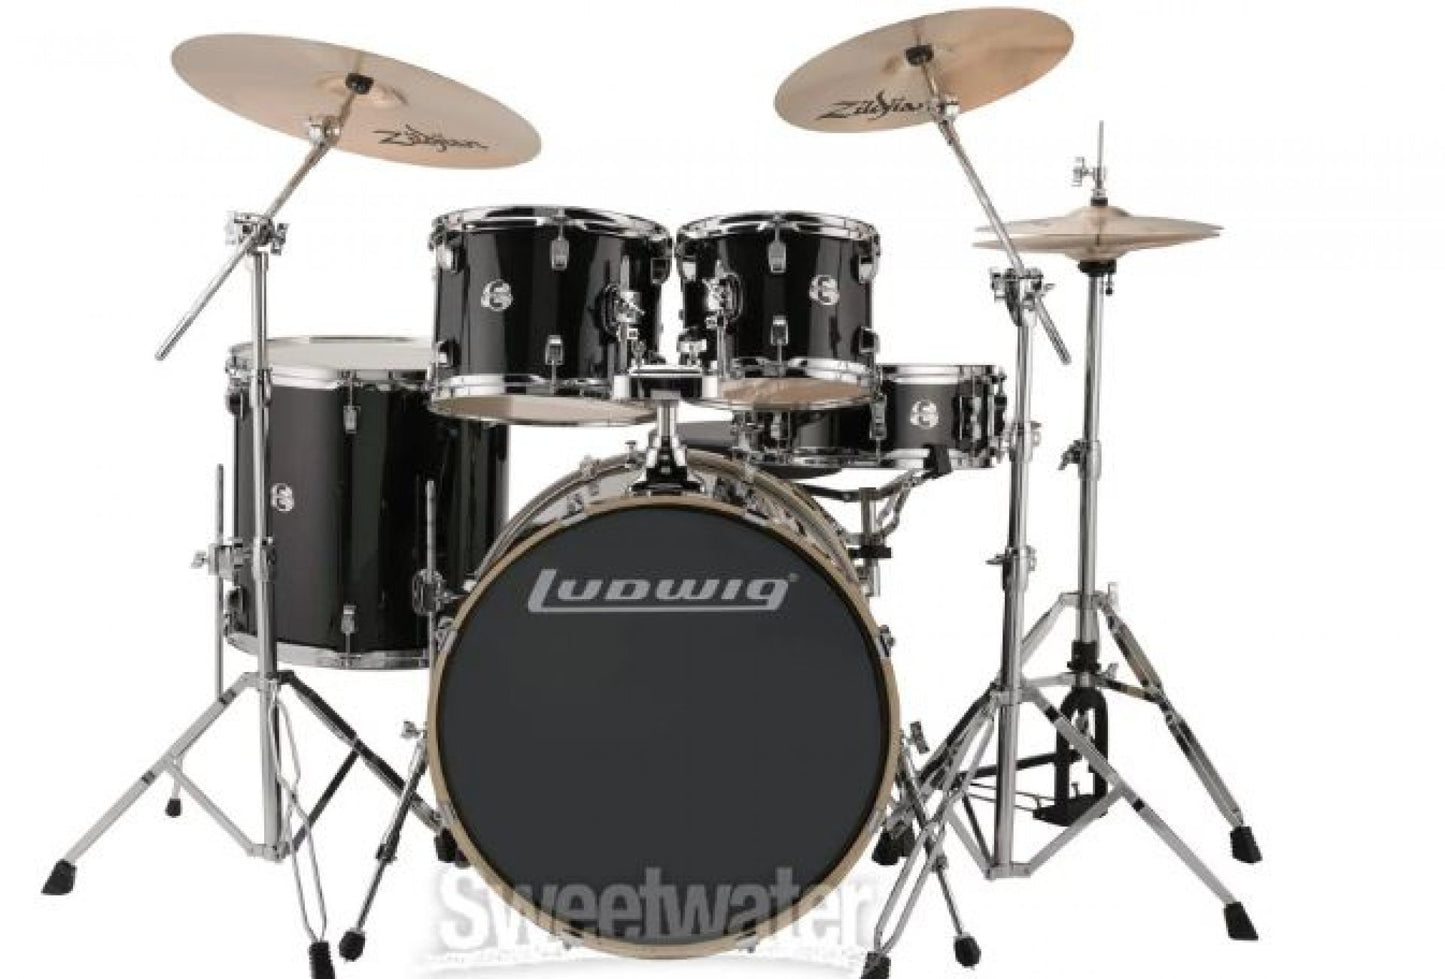 Ludwig Element Evolution LCEE220 5-piece Complete Drum Set with Zildjian Cymbals - Black Sparkle